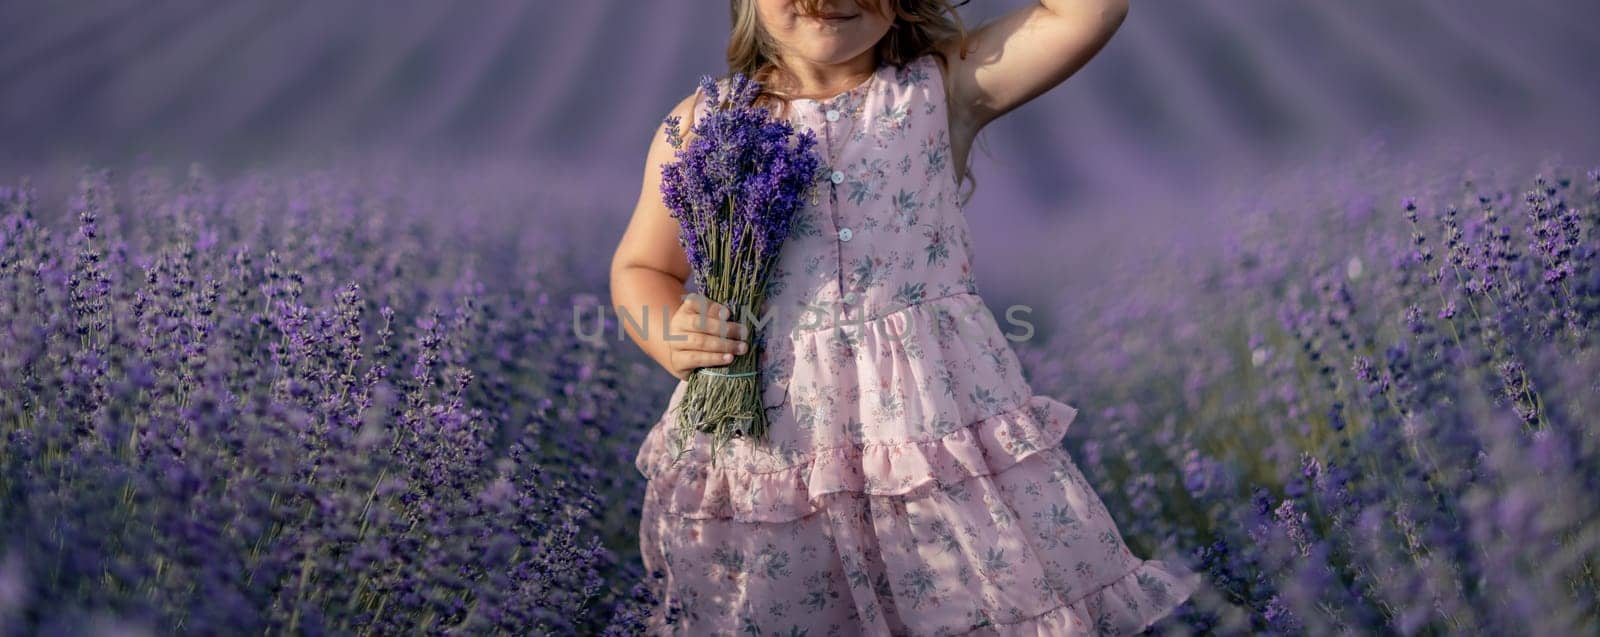 girl lavender field in a pink dress holds a bouquet of lavender on a lilac field. Aromatherapy concept, lavender oil, photo shoot in lavender by Matiunina